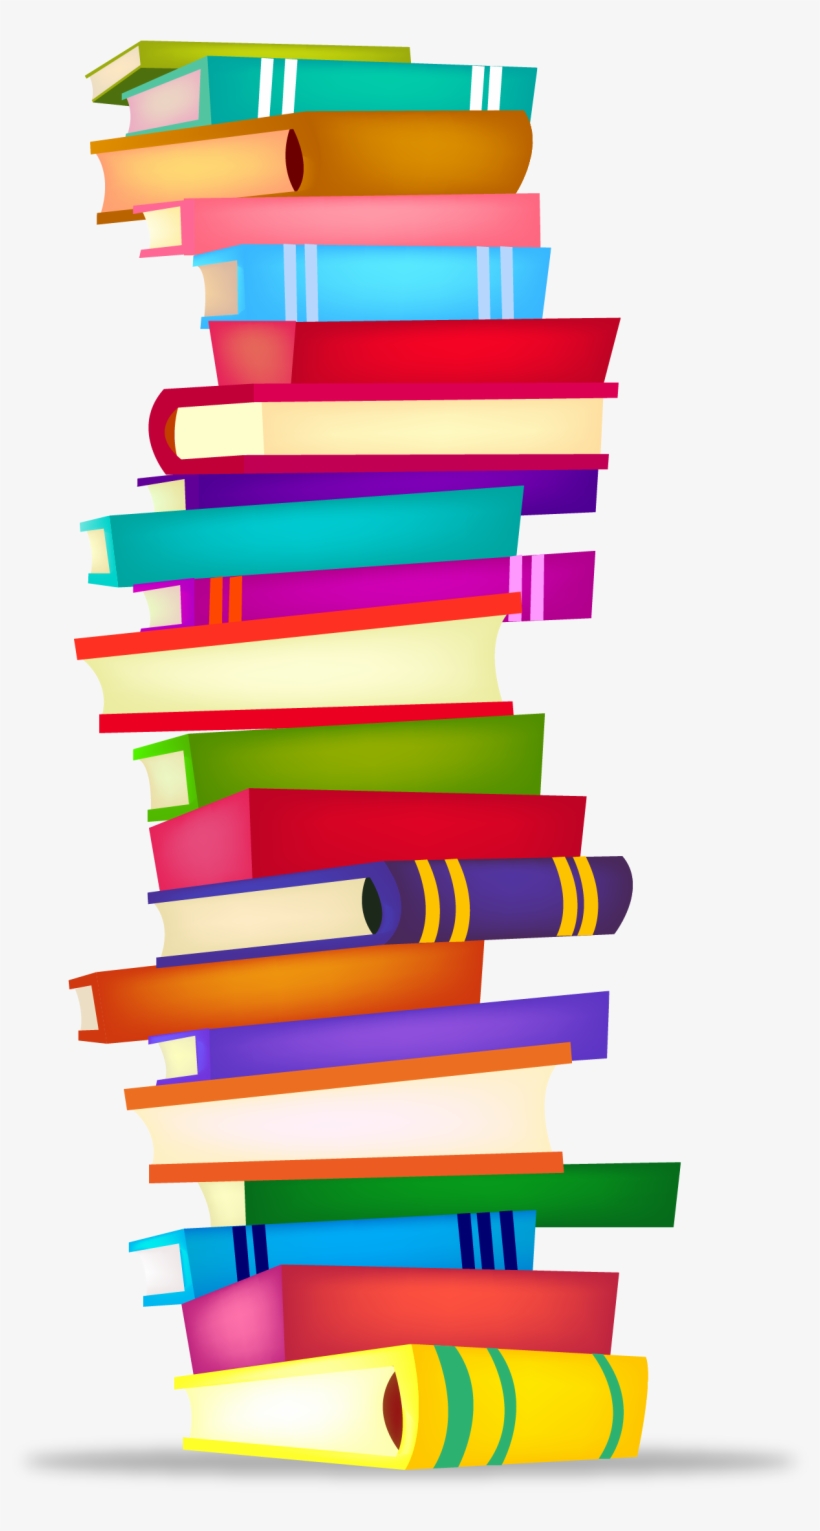 stack of books clipart